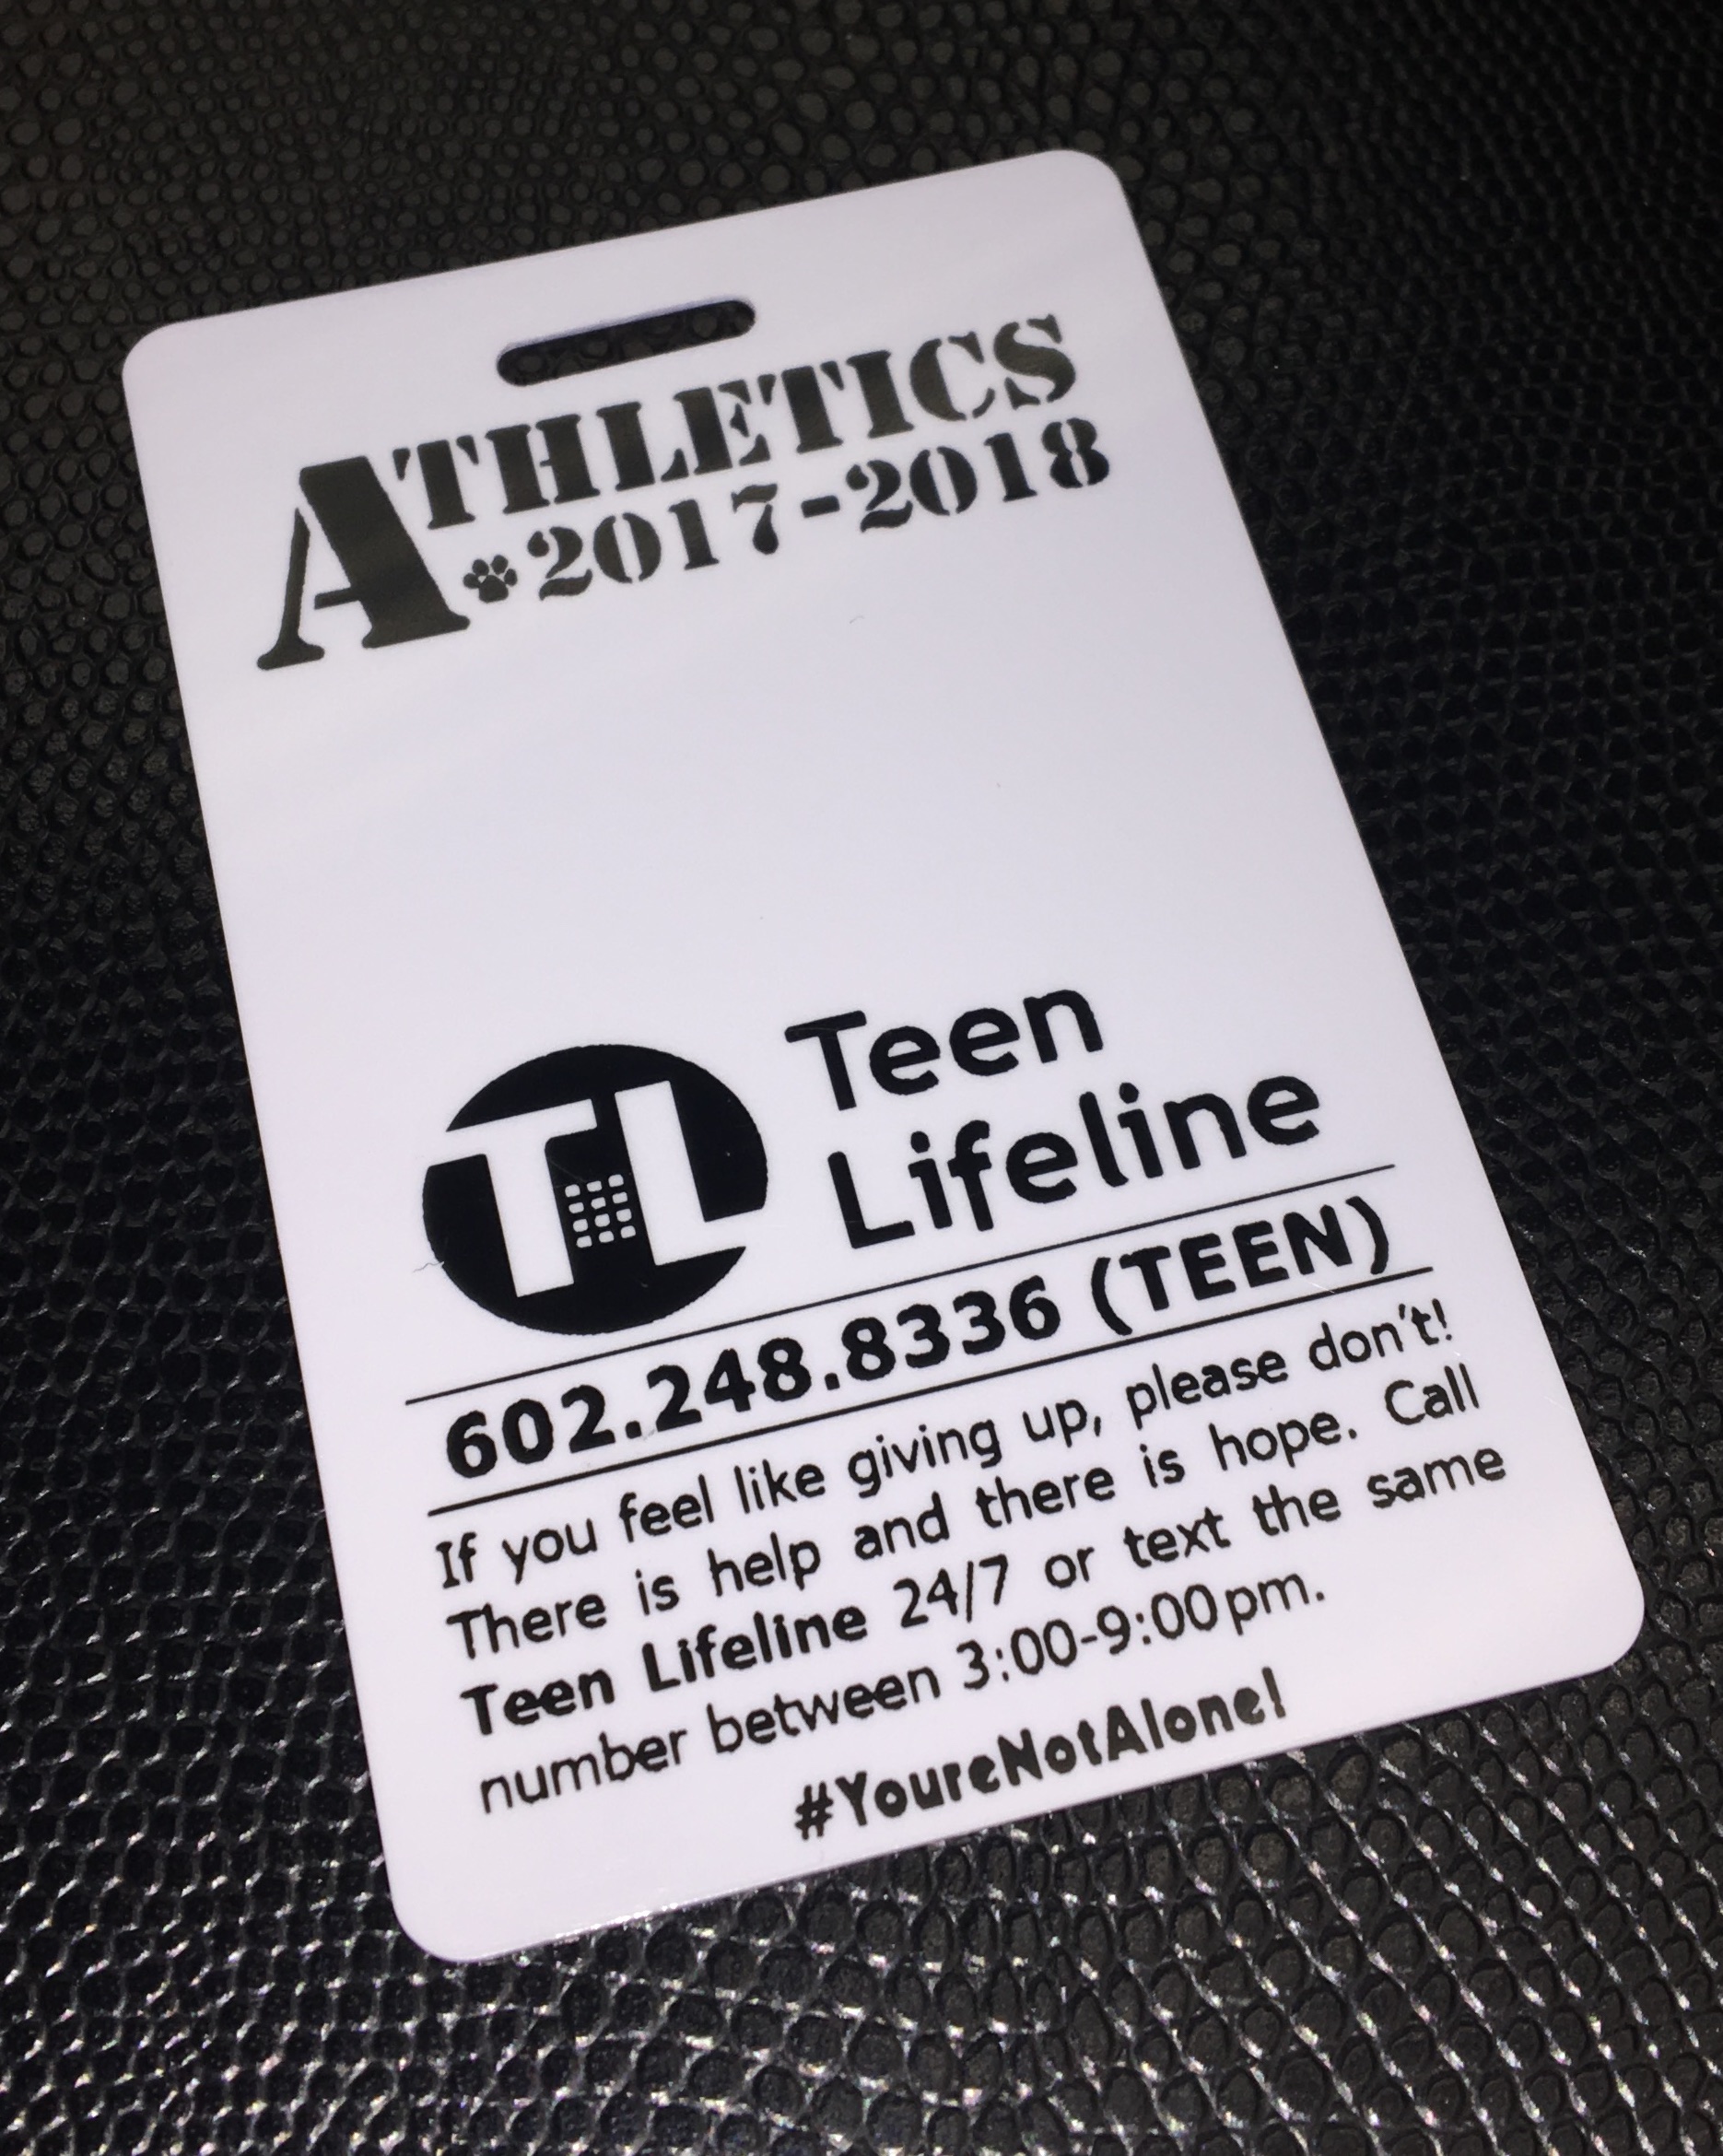 Arizona's Tempe Union High School District prints a suicide hotline number on ID badges.